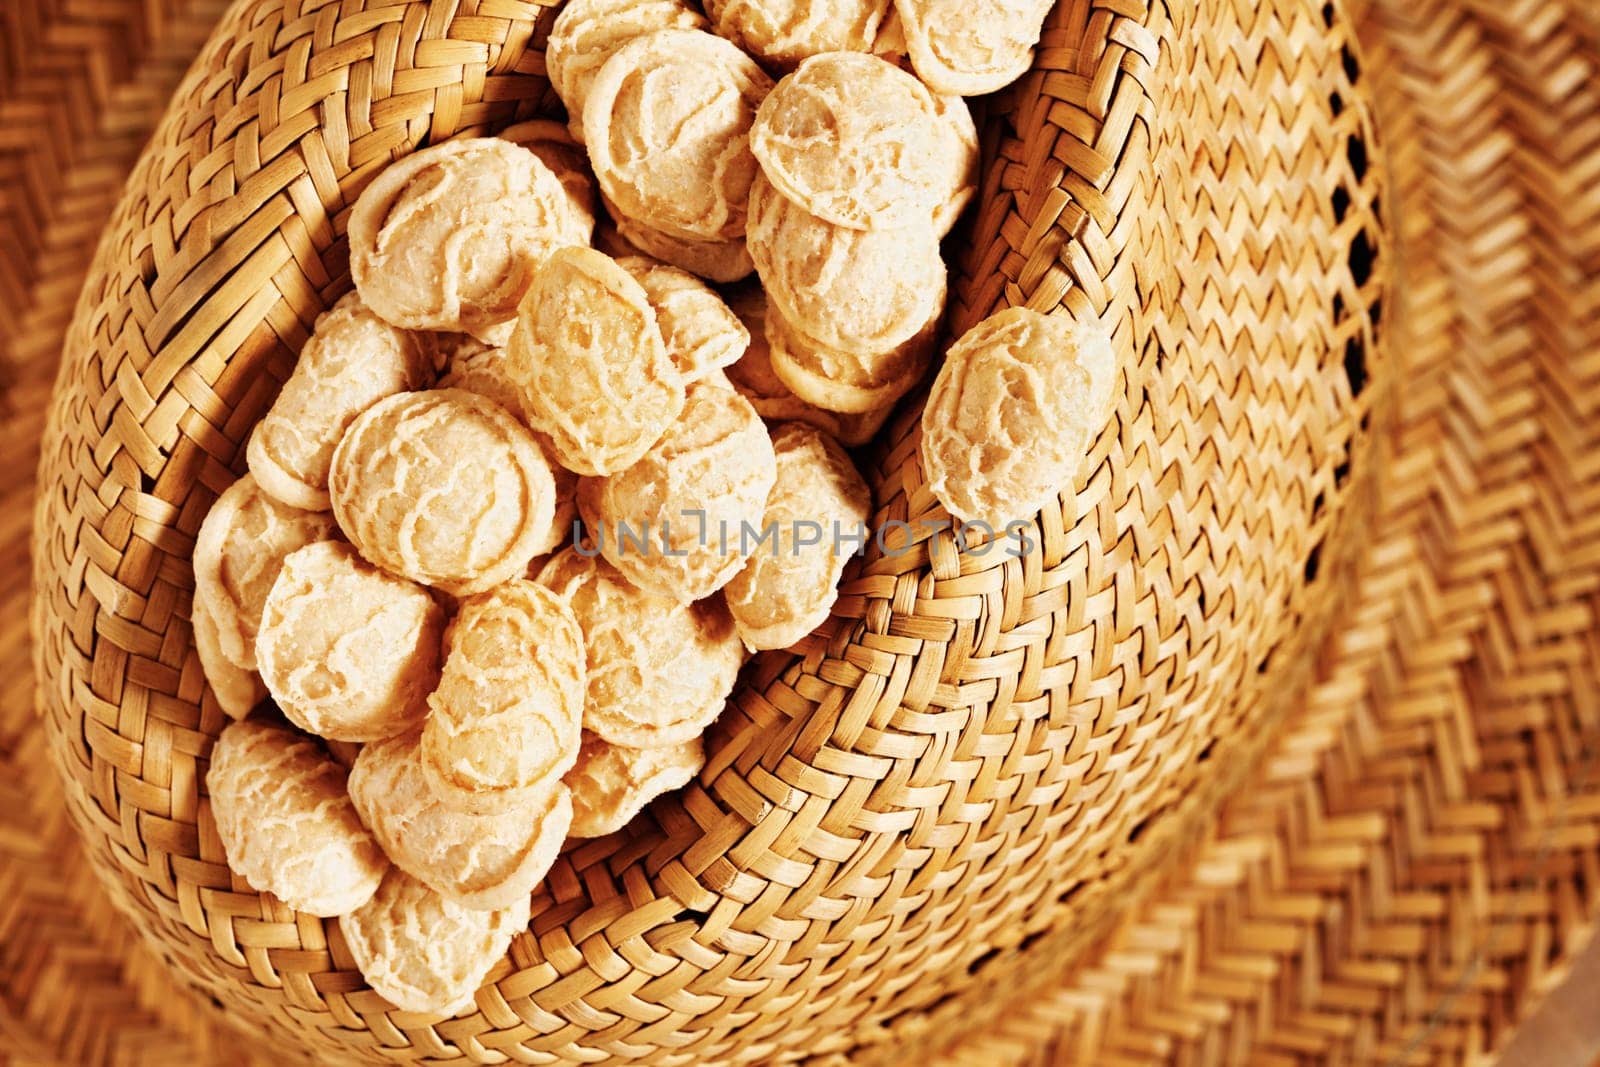 Apulian orecchiette pasta, handmade fresh pasta ,name comes from their shape which resembles a small ear